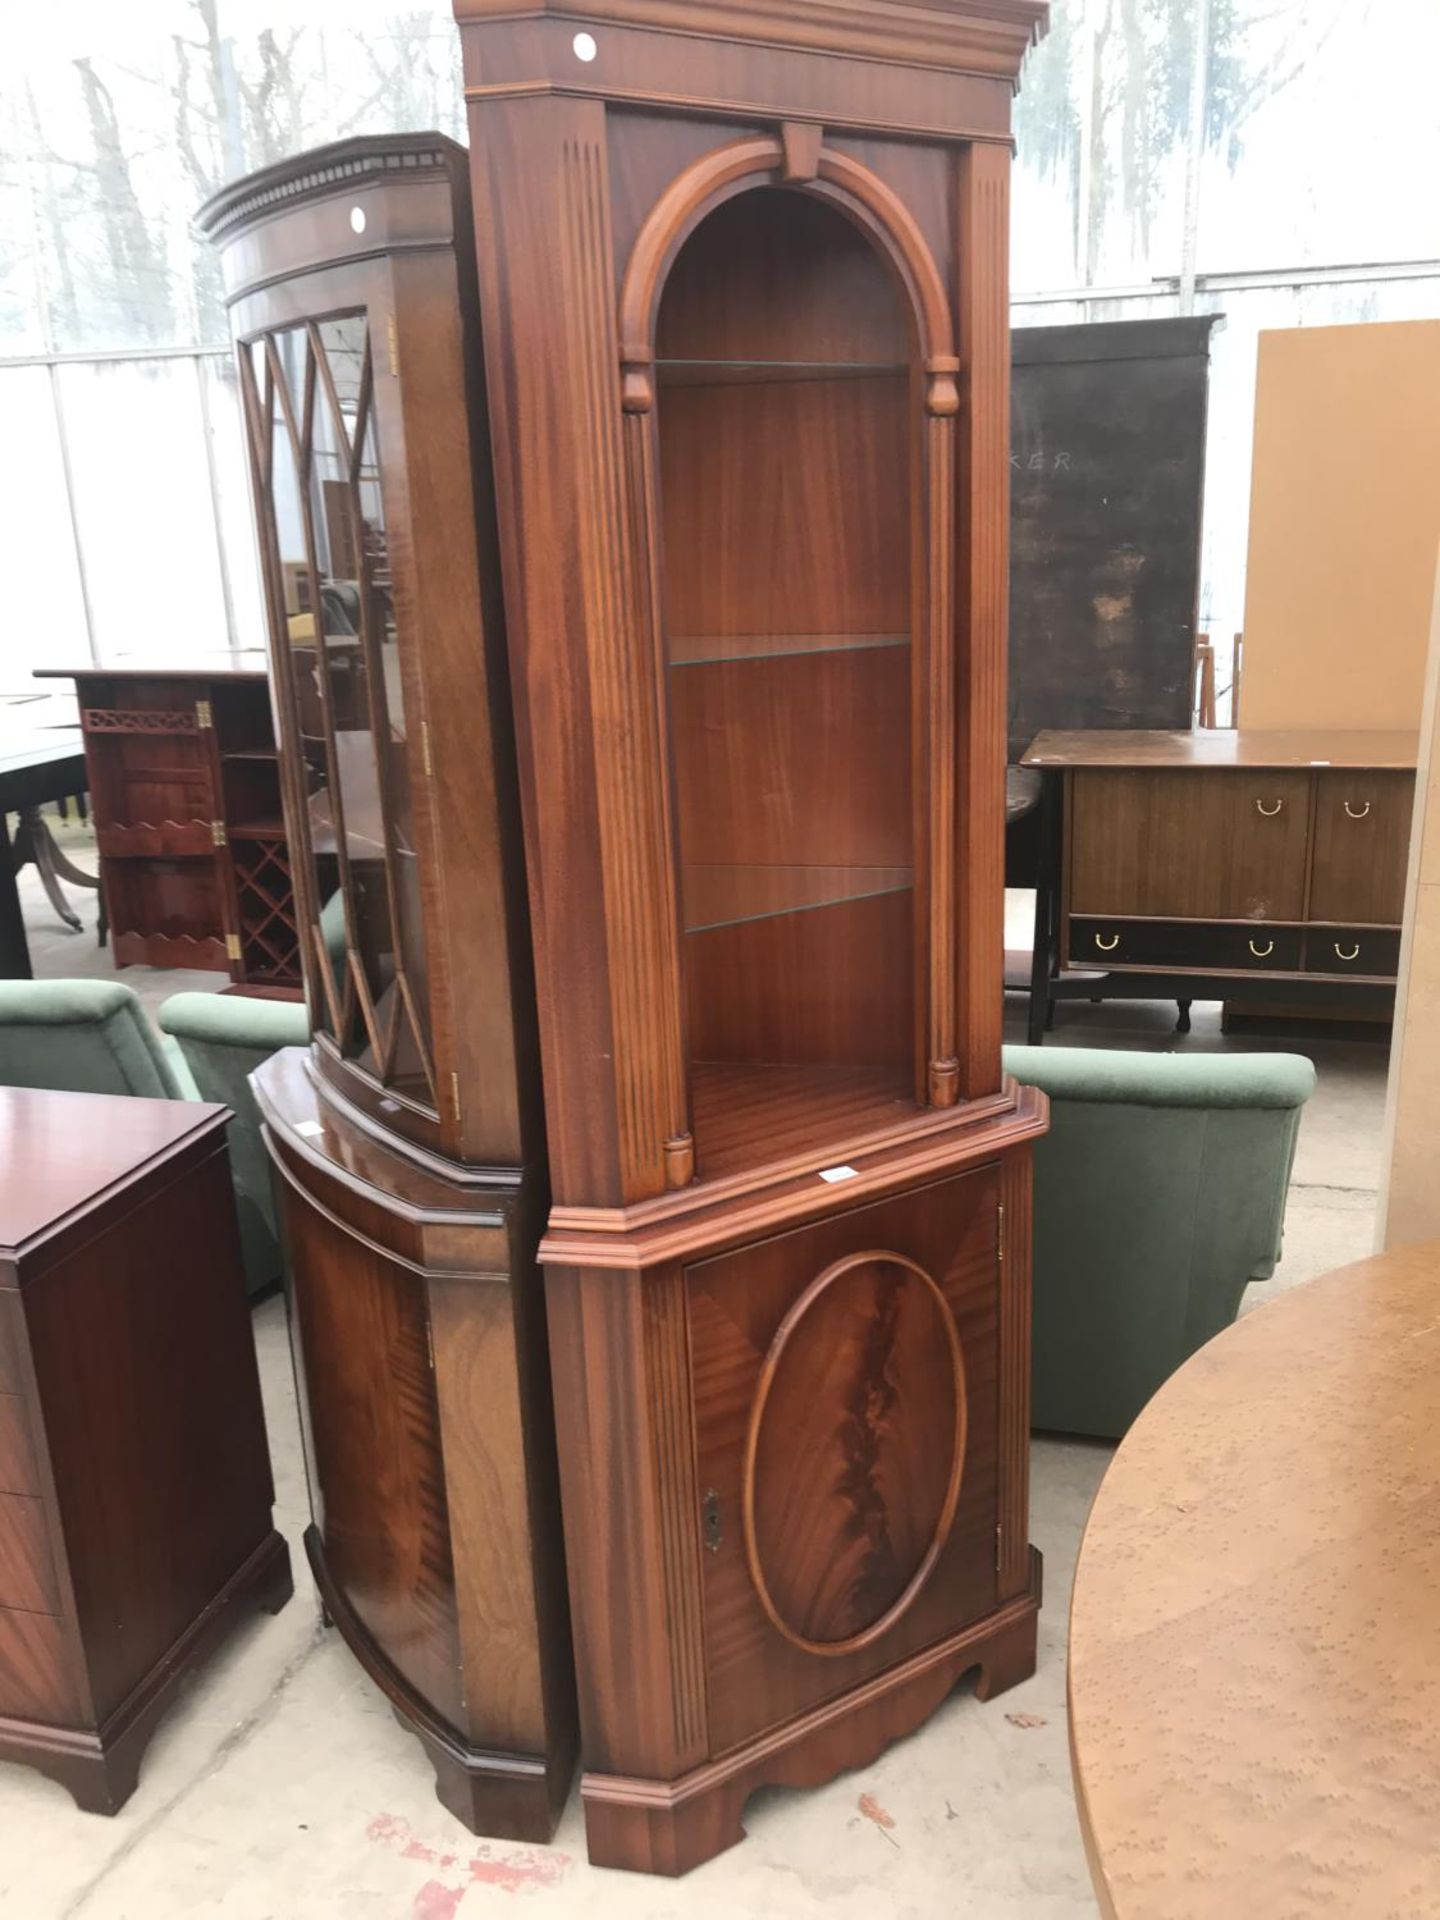 A MAHOGANY CORNER CABINET WITH LOWER DOOR AND UPPER SHELVING